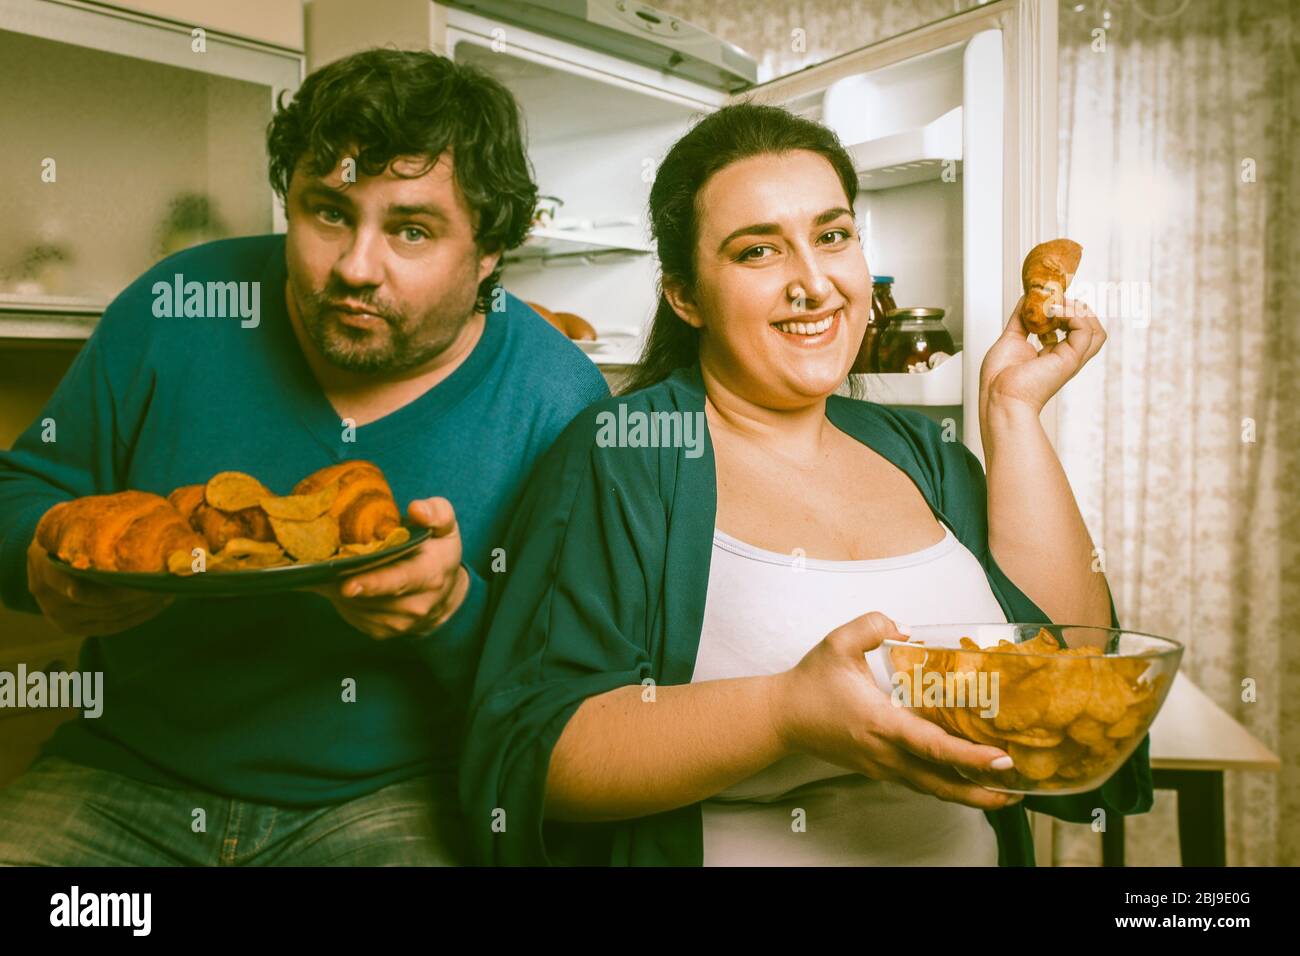 Plus Size Family Eating Unhealthy Food Stock Photo